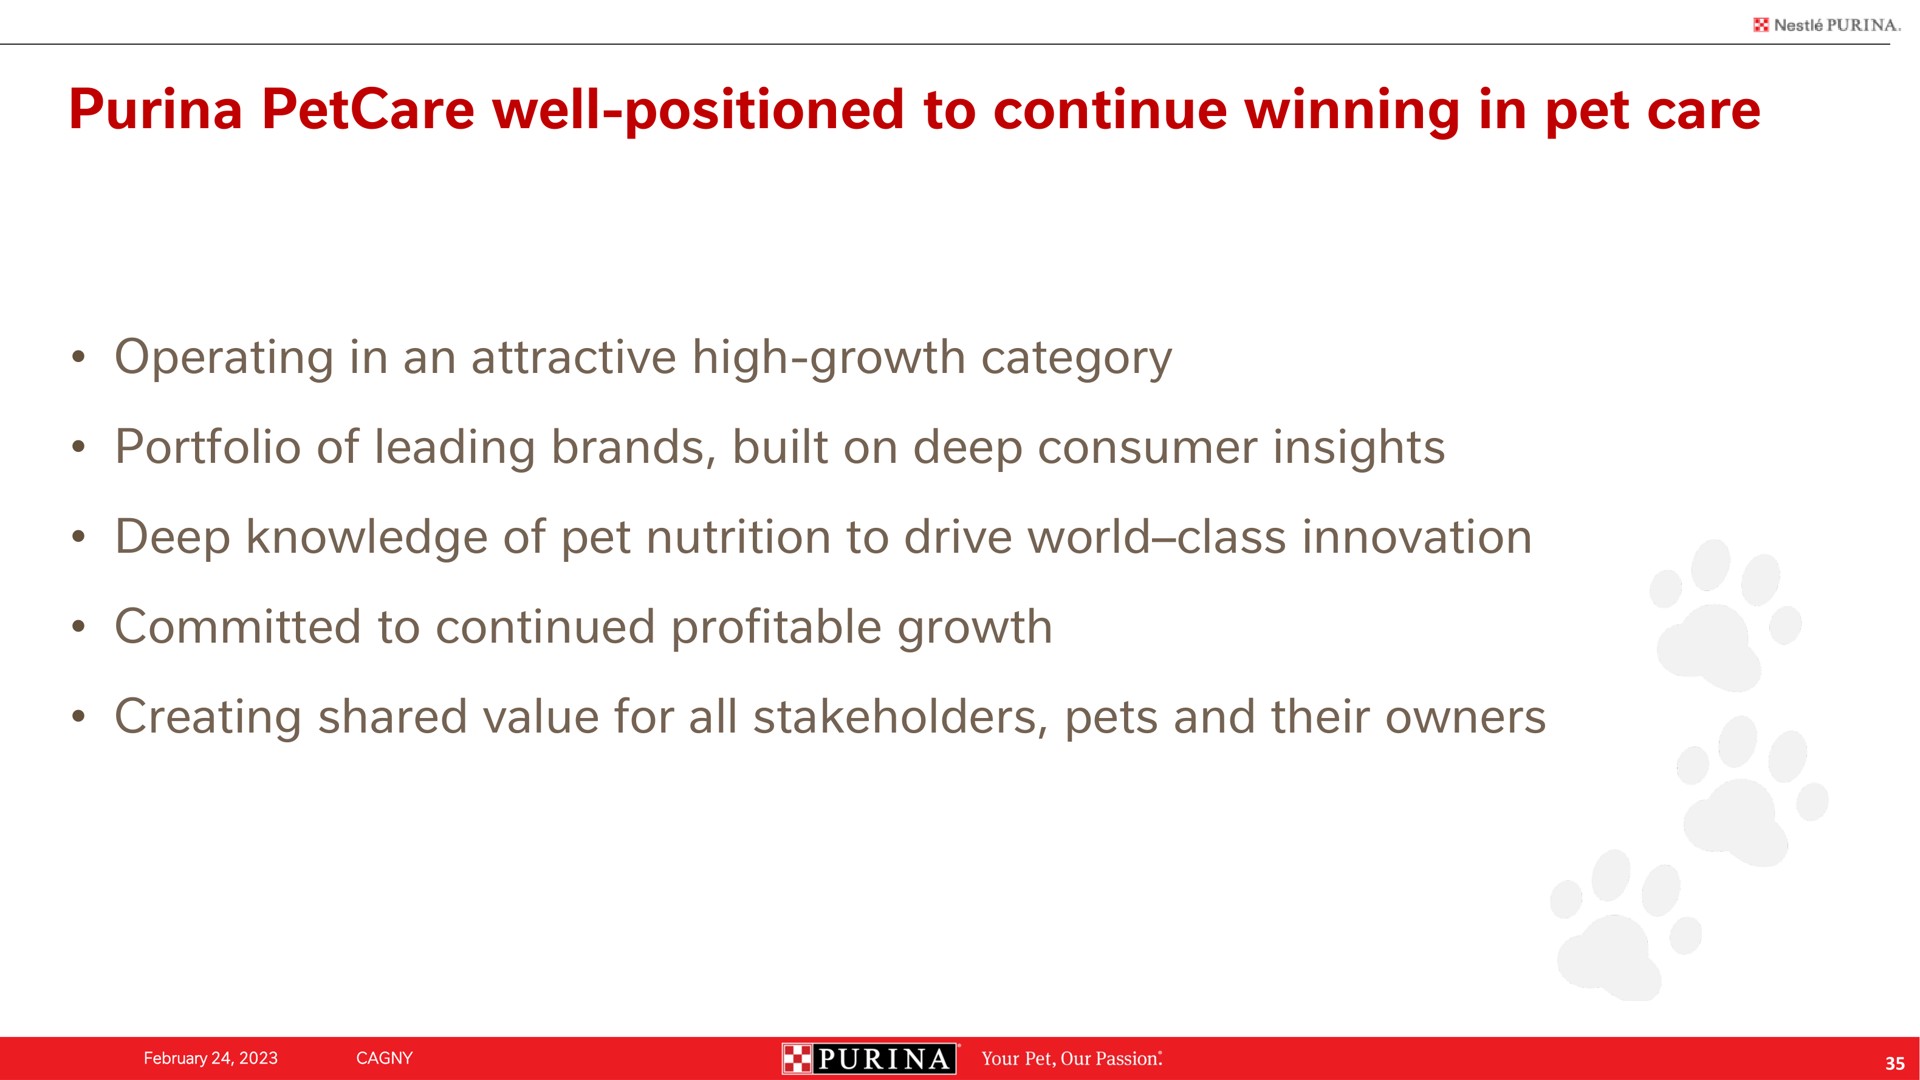 well positioned to continue winning in pet care | Nestle